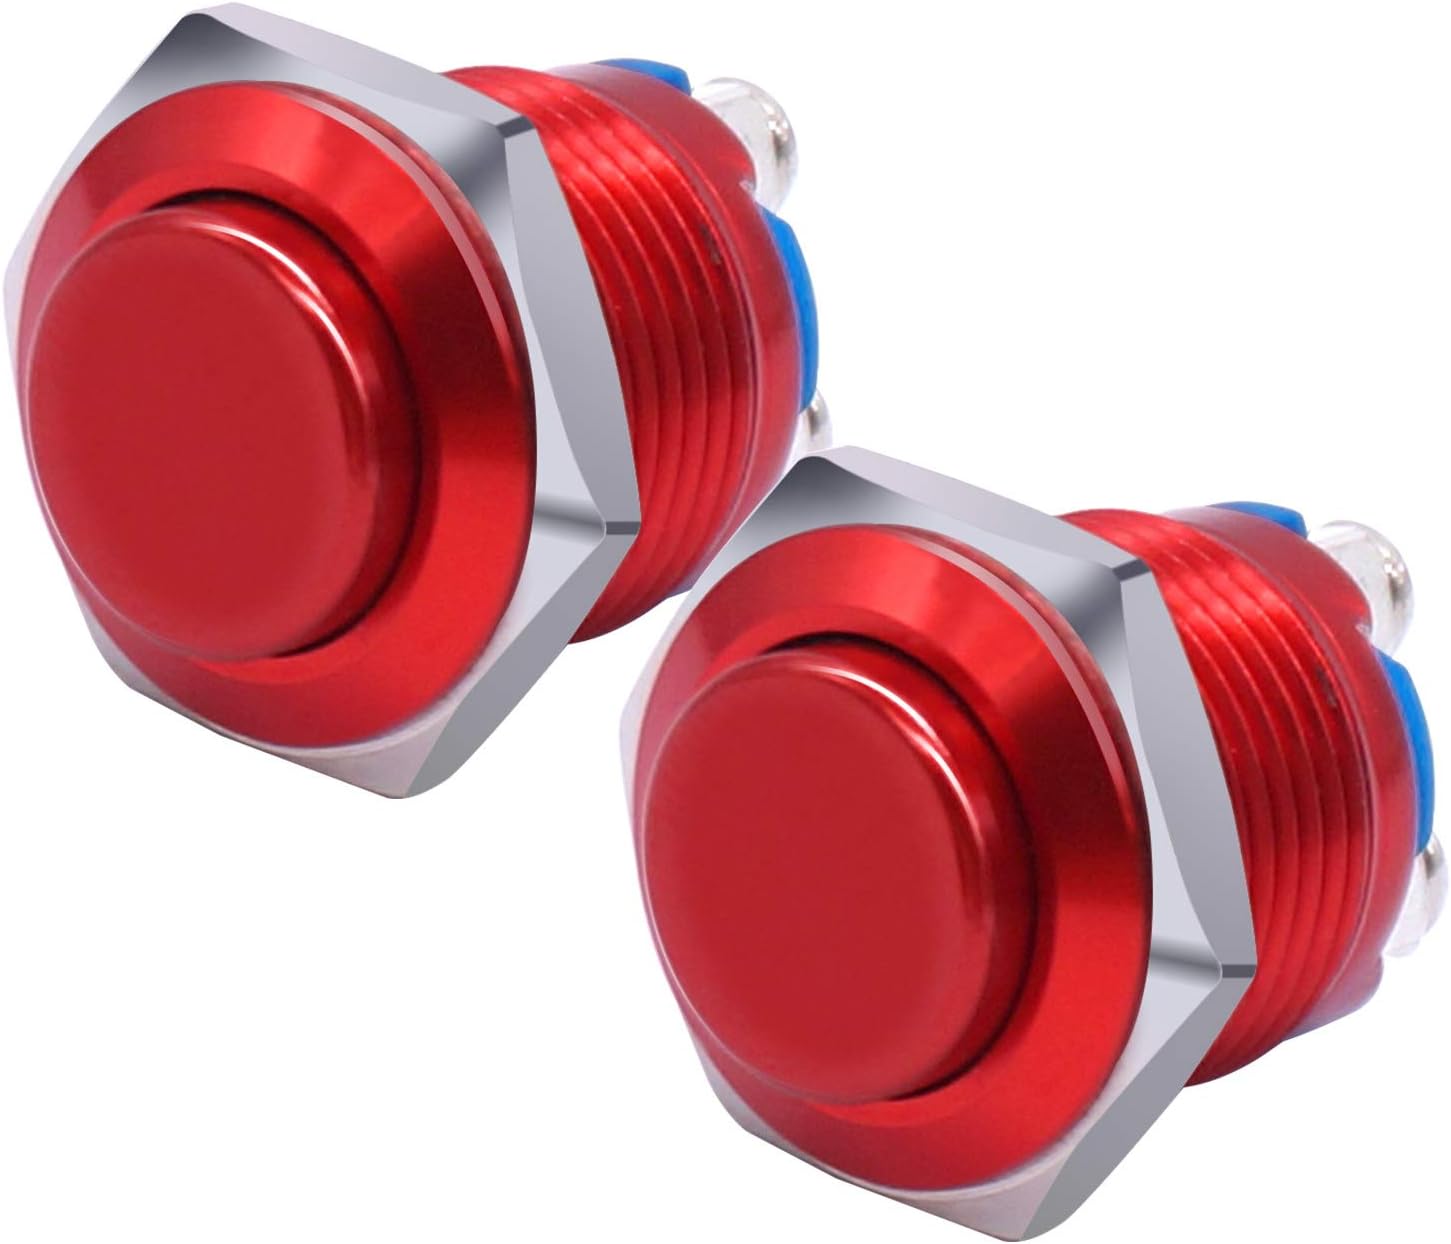 1 x 16mm Round Metal Push Button Momentary Switch Red 